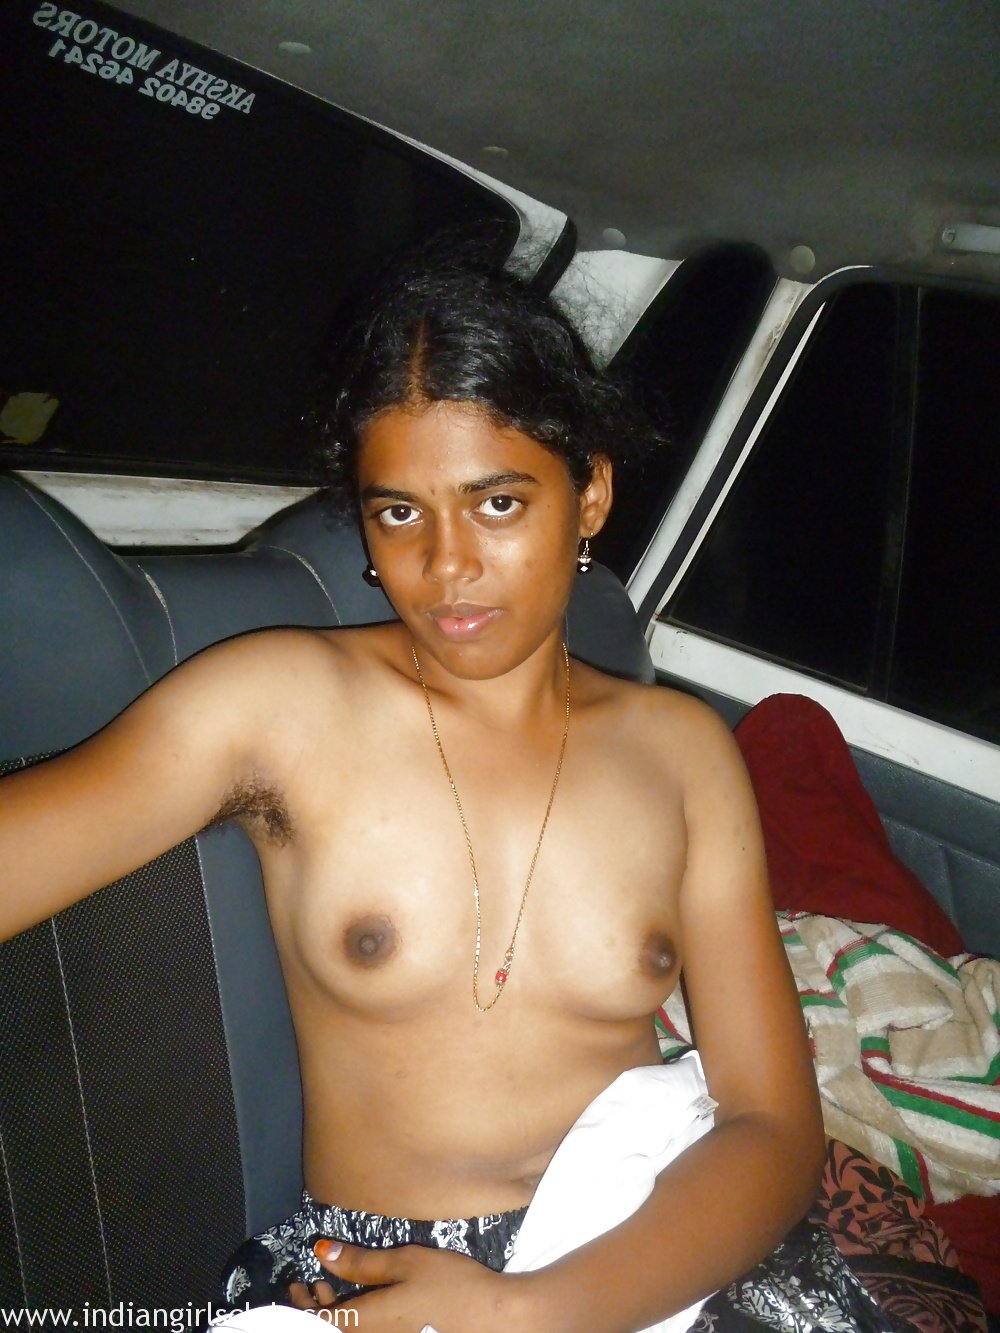 Erotic South Indian Wife Nude Photos - Indian Girls Club